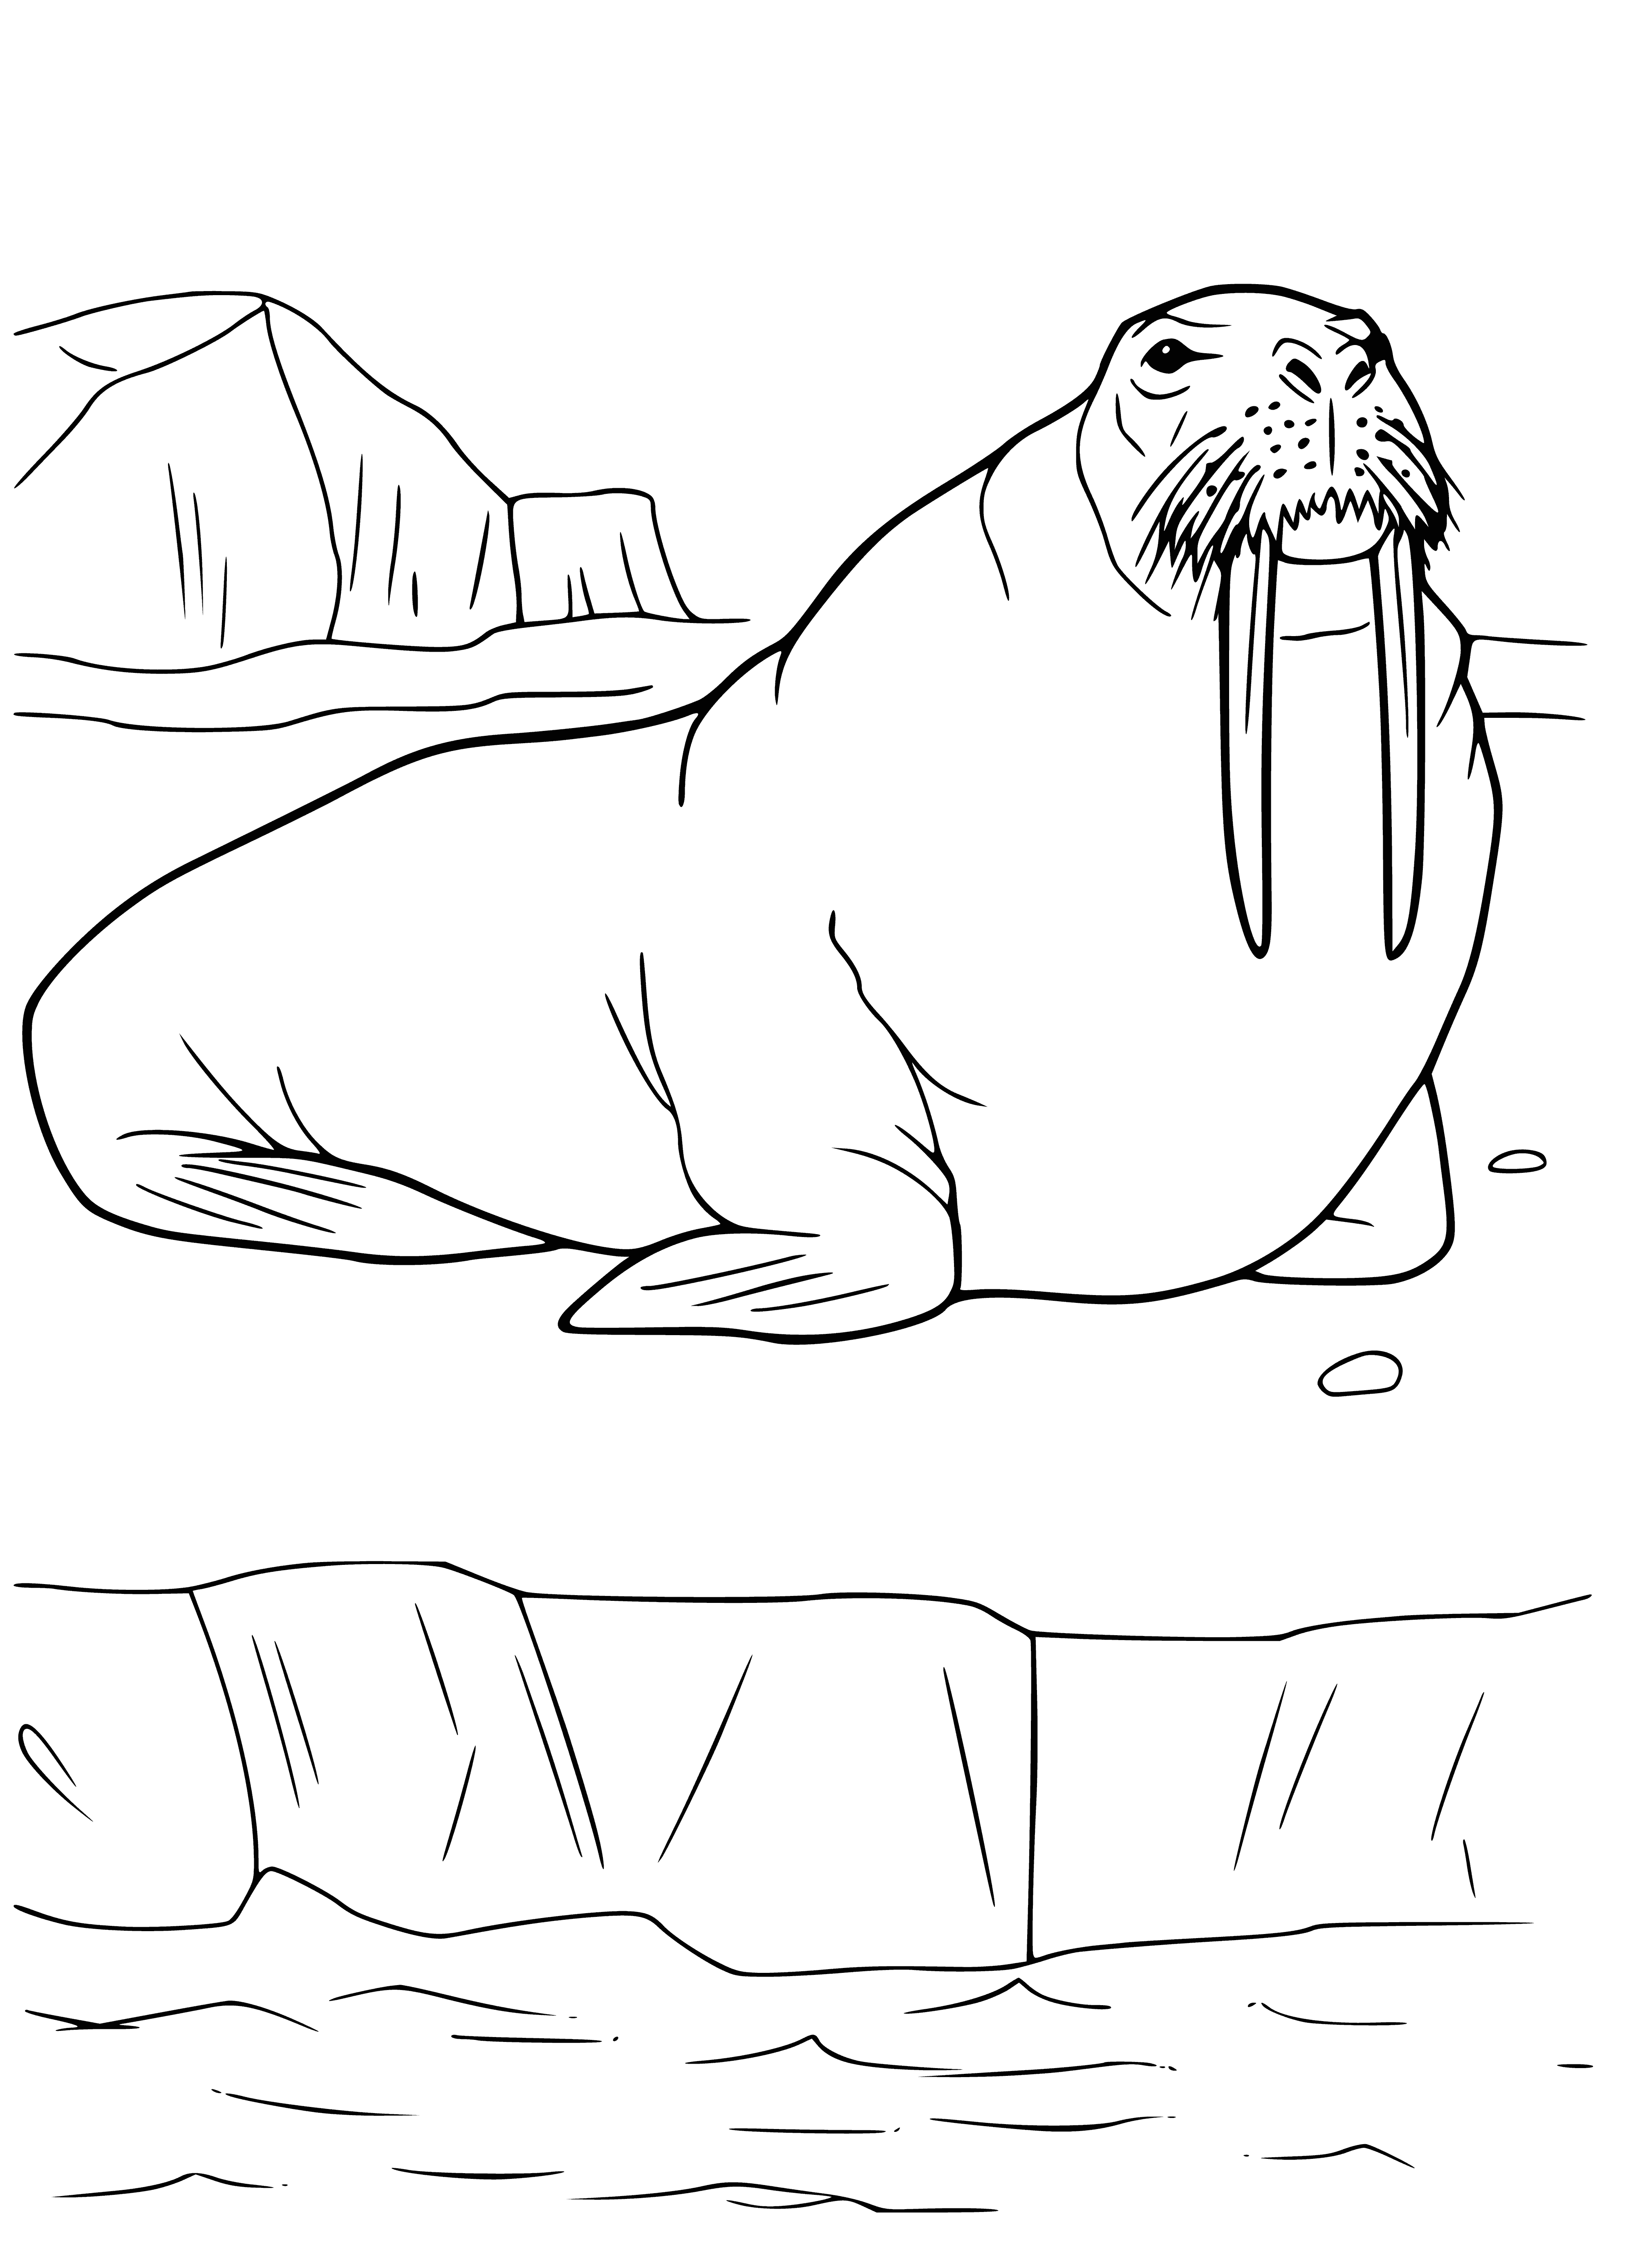 coloring page: Walruses: large, flippered marine mammals w/ wrinkled skin, tusks & whiskers. Bigger males can weigh 1,500 kg. Related to seals & sea lions.